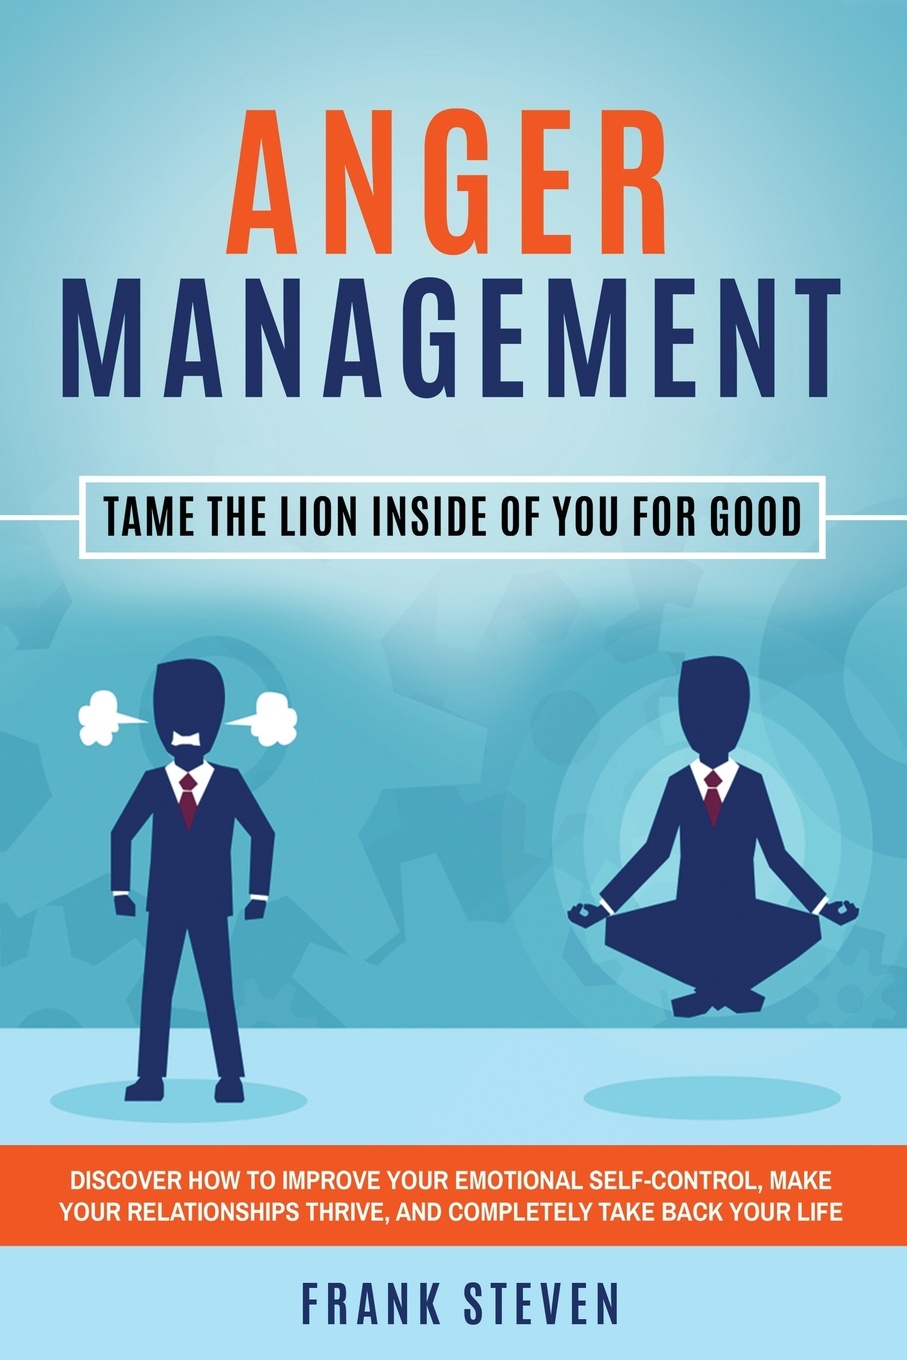 Anger Management. Tame The Lion Inside of You for Good: Discover How to Improve Your Emotional Self-Control, Make Your Relationships Thrive, and Completely Take Back Your Life